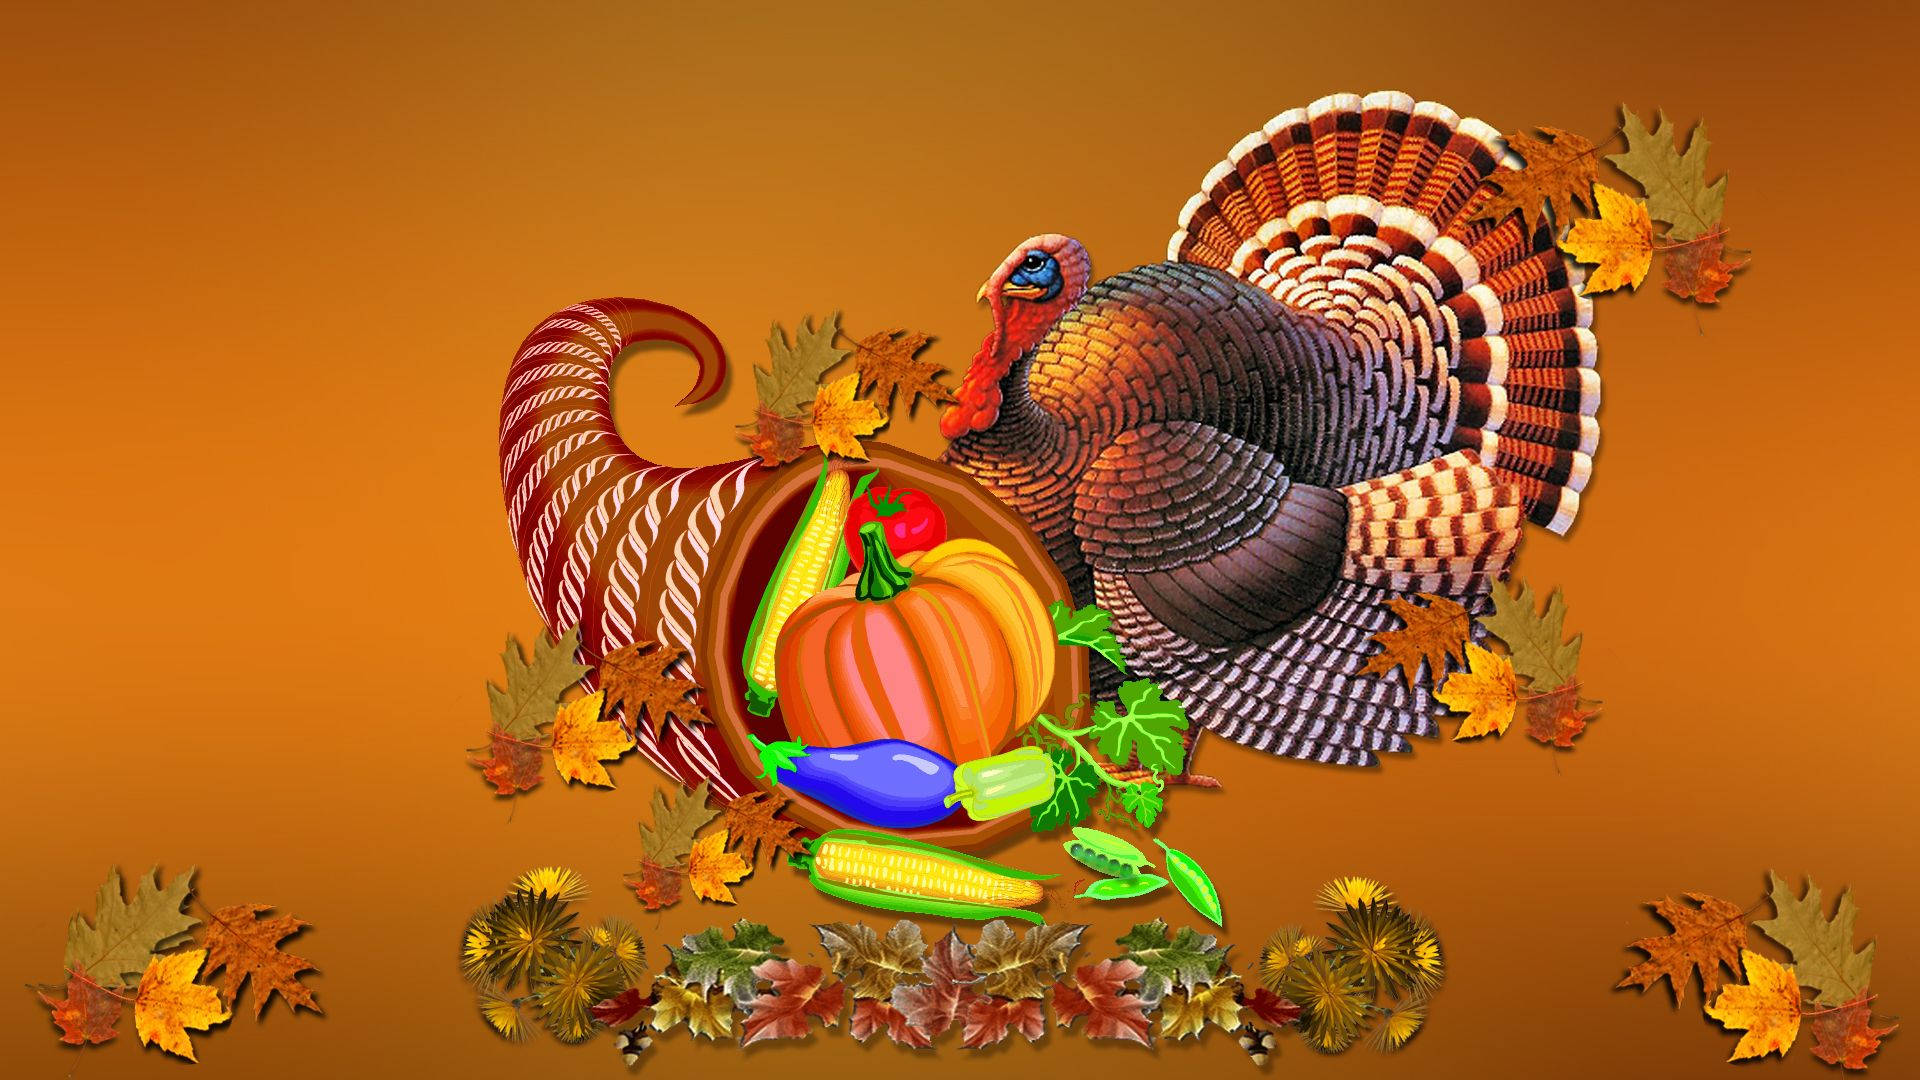 1920X1080 Thanksgiving Wallpaper and Background